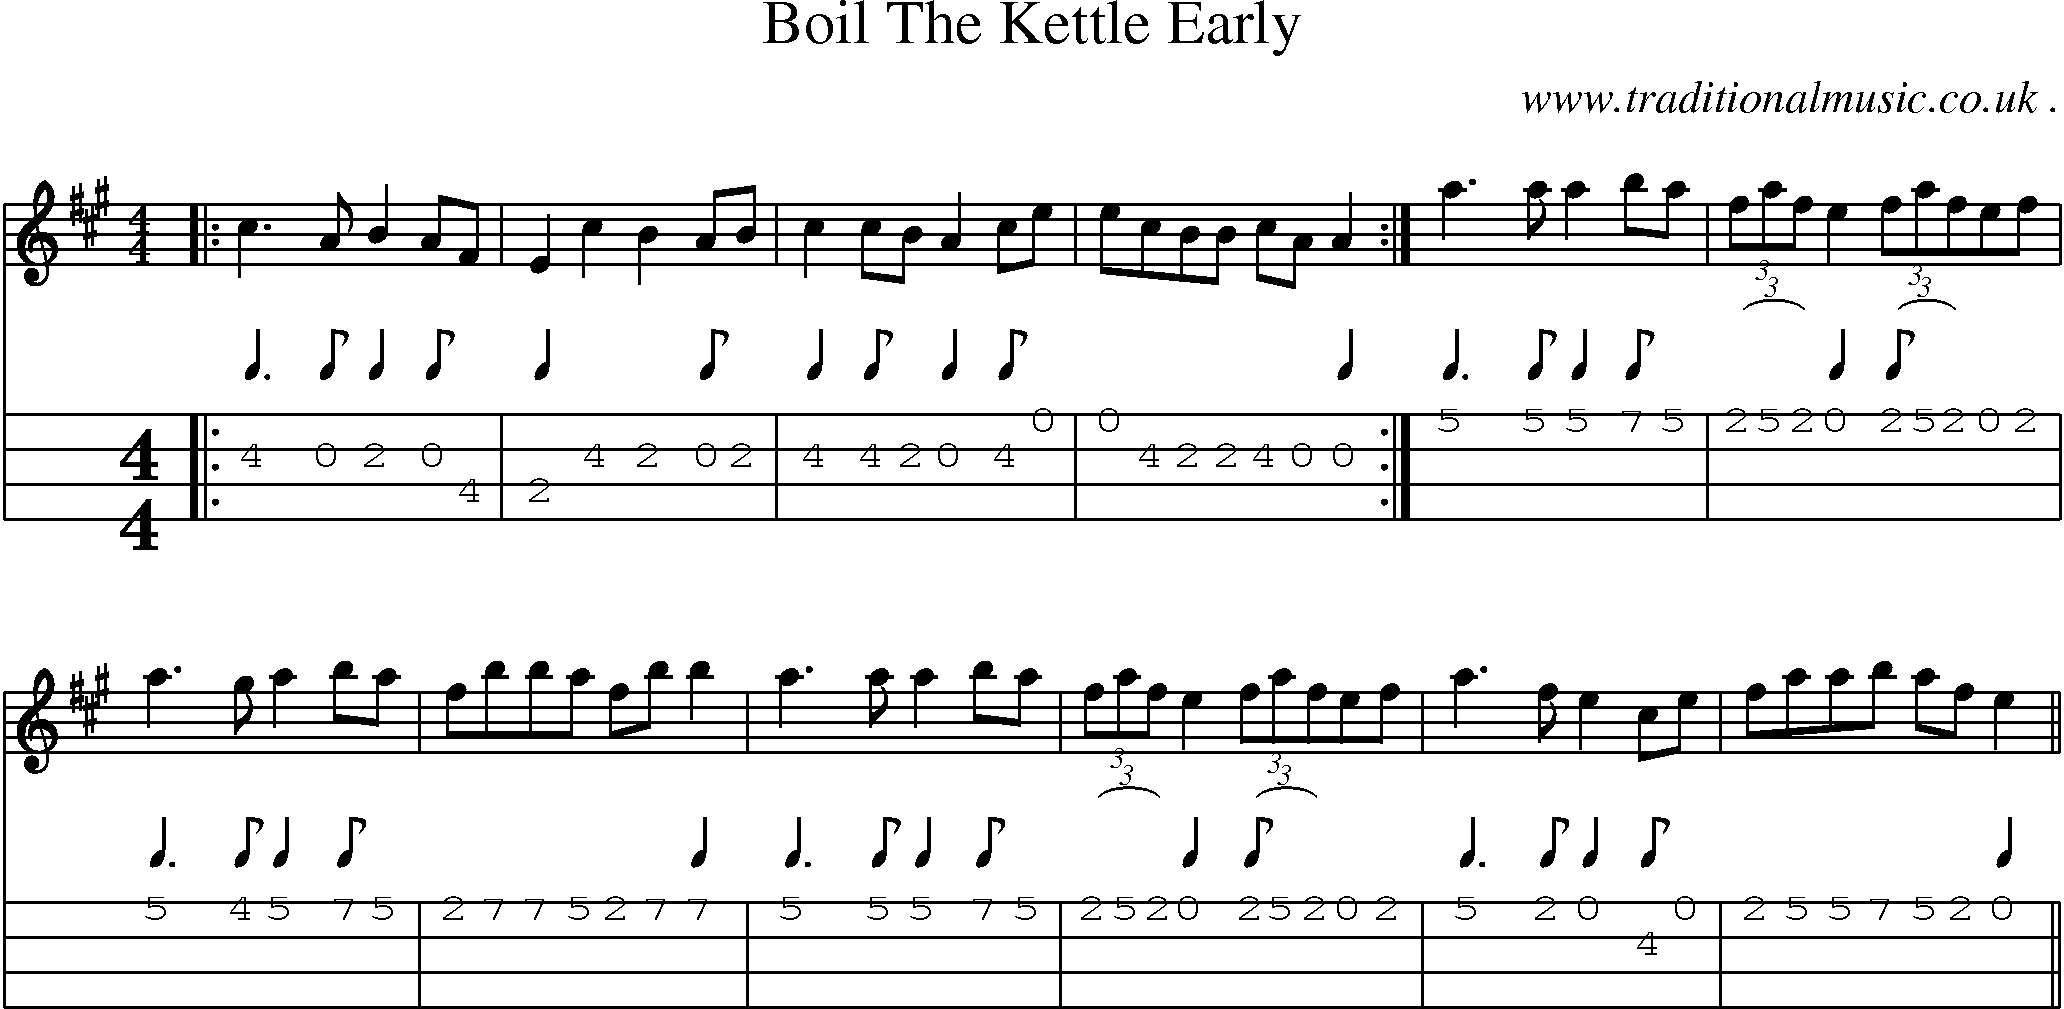 Sheet-Music and Mandolin Tabs for Boil The Kettle Early